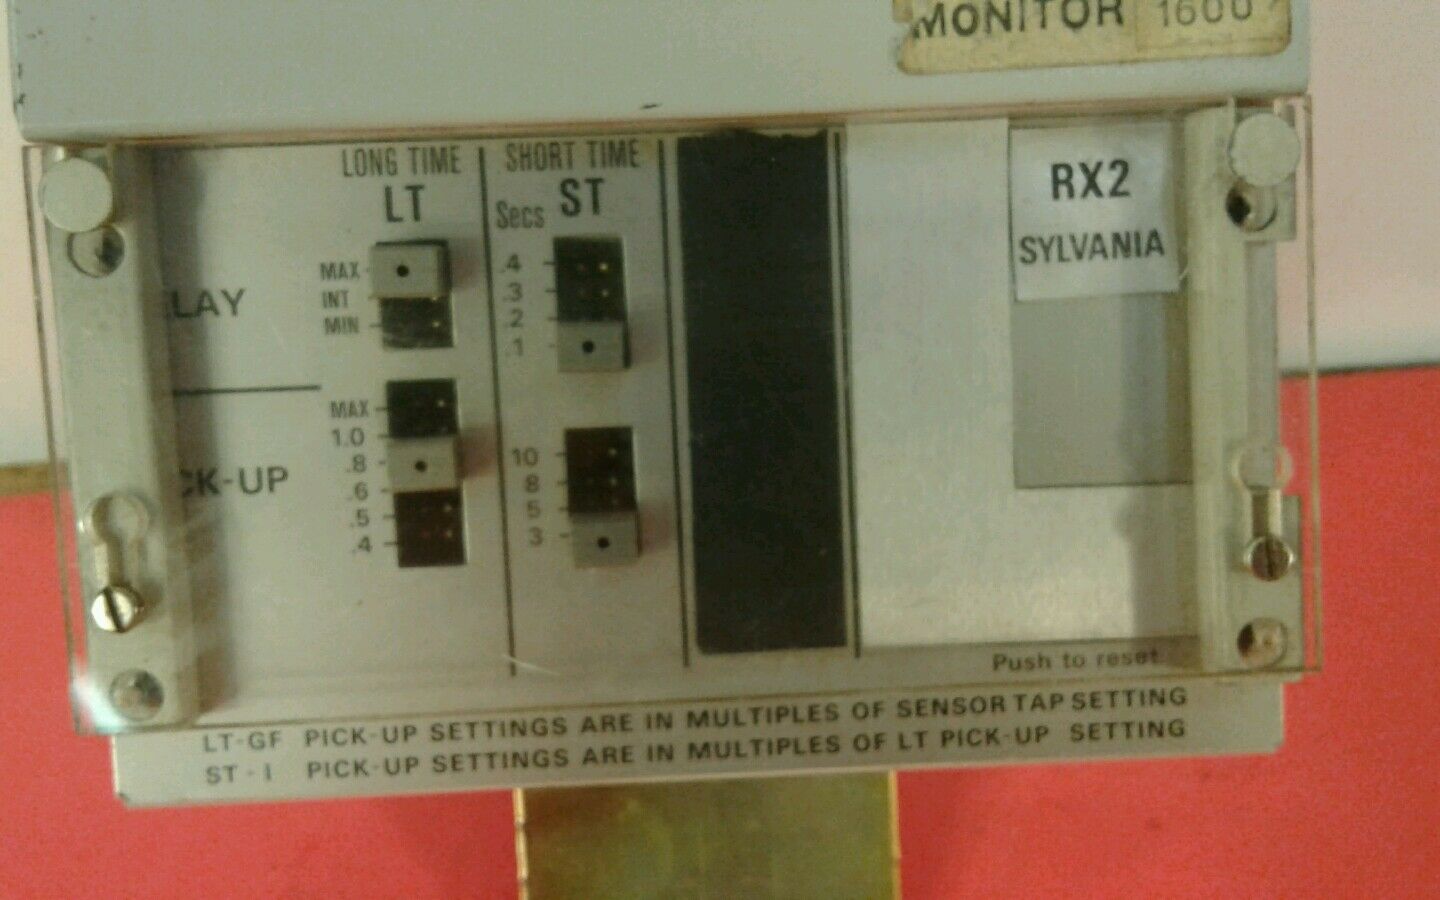 RX2 - SYLVANIA RX2 SOLID STATE PROGRAMMER.    3A